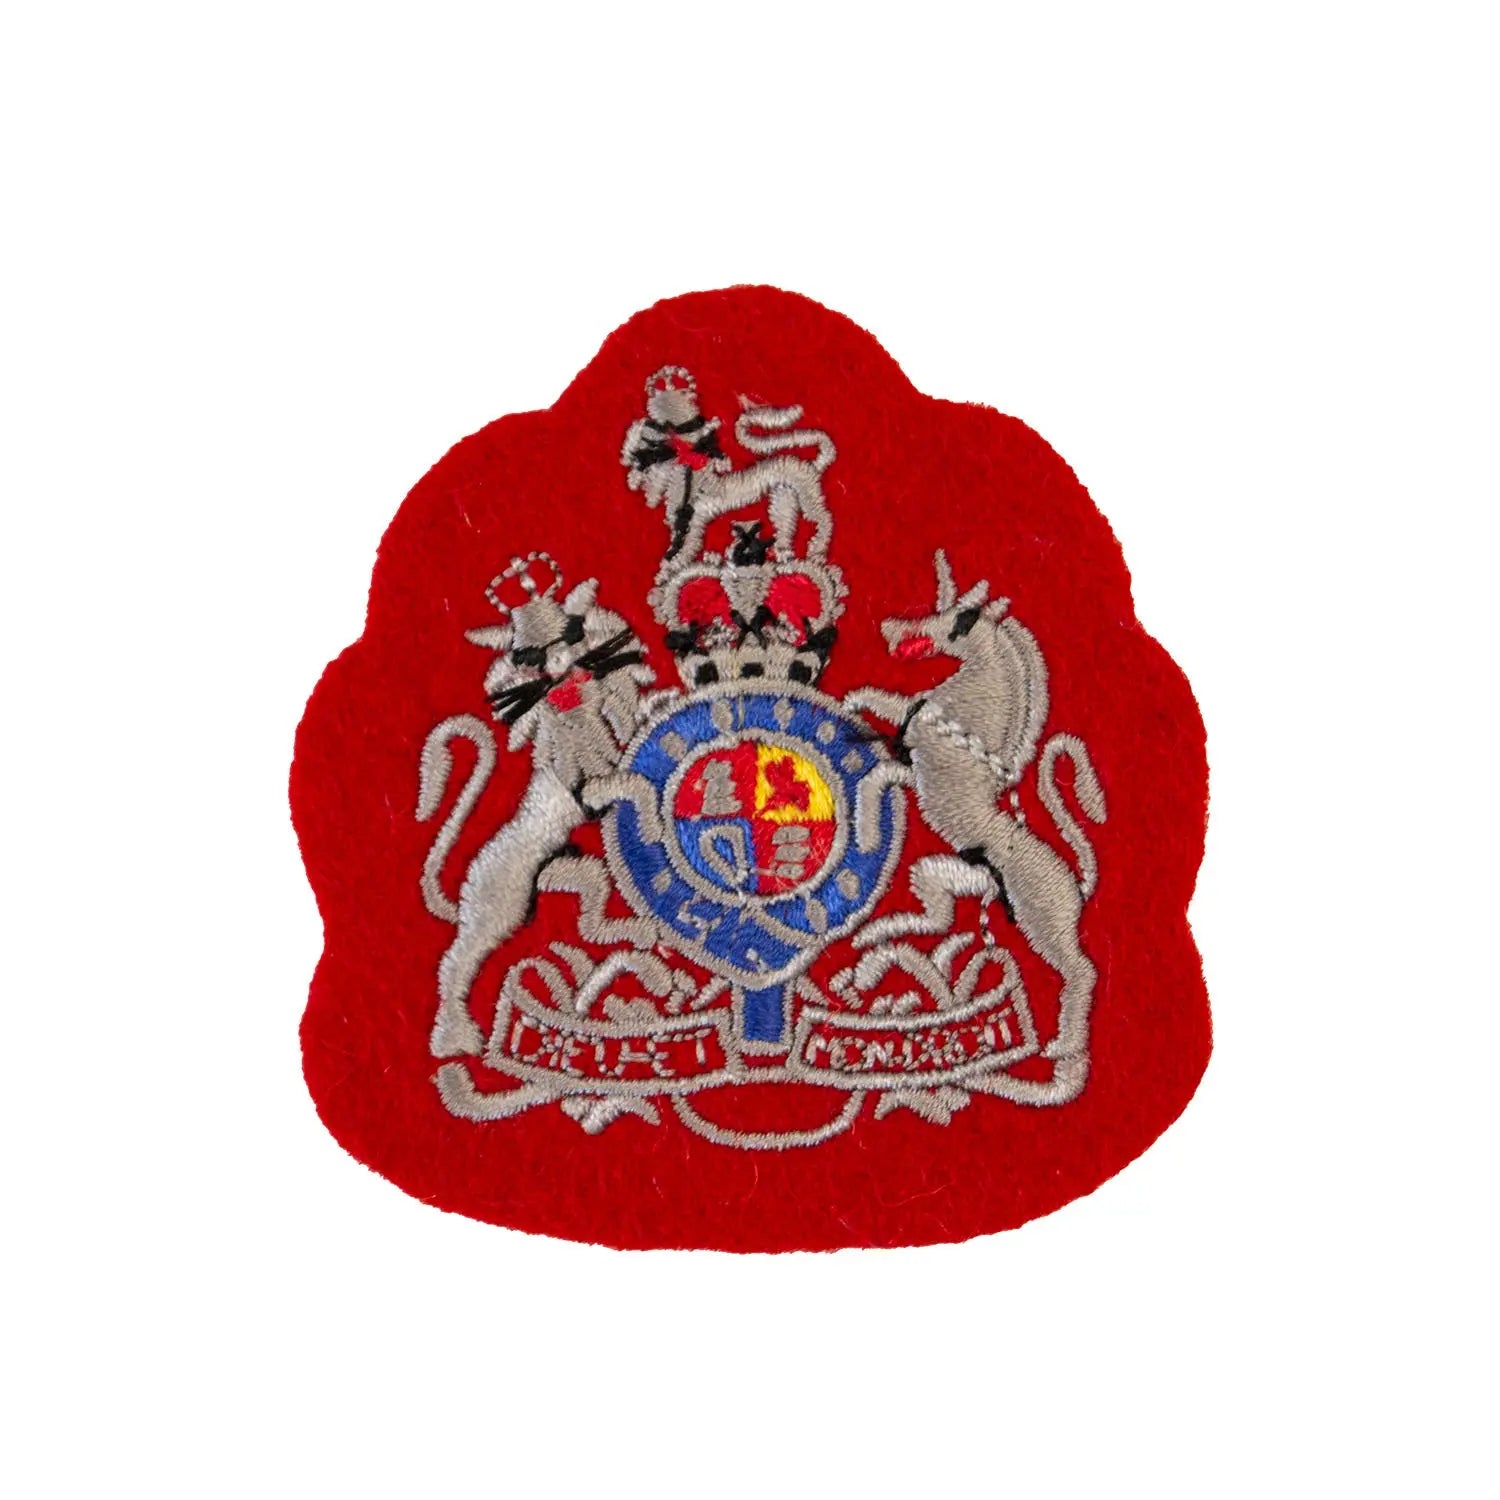 Royal Arms Warrant Officer Class 1 (WO1) Queen Alexander Royal Army Nursing Corps Rank Insignia British Army wyedean